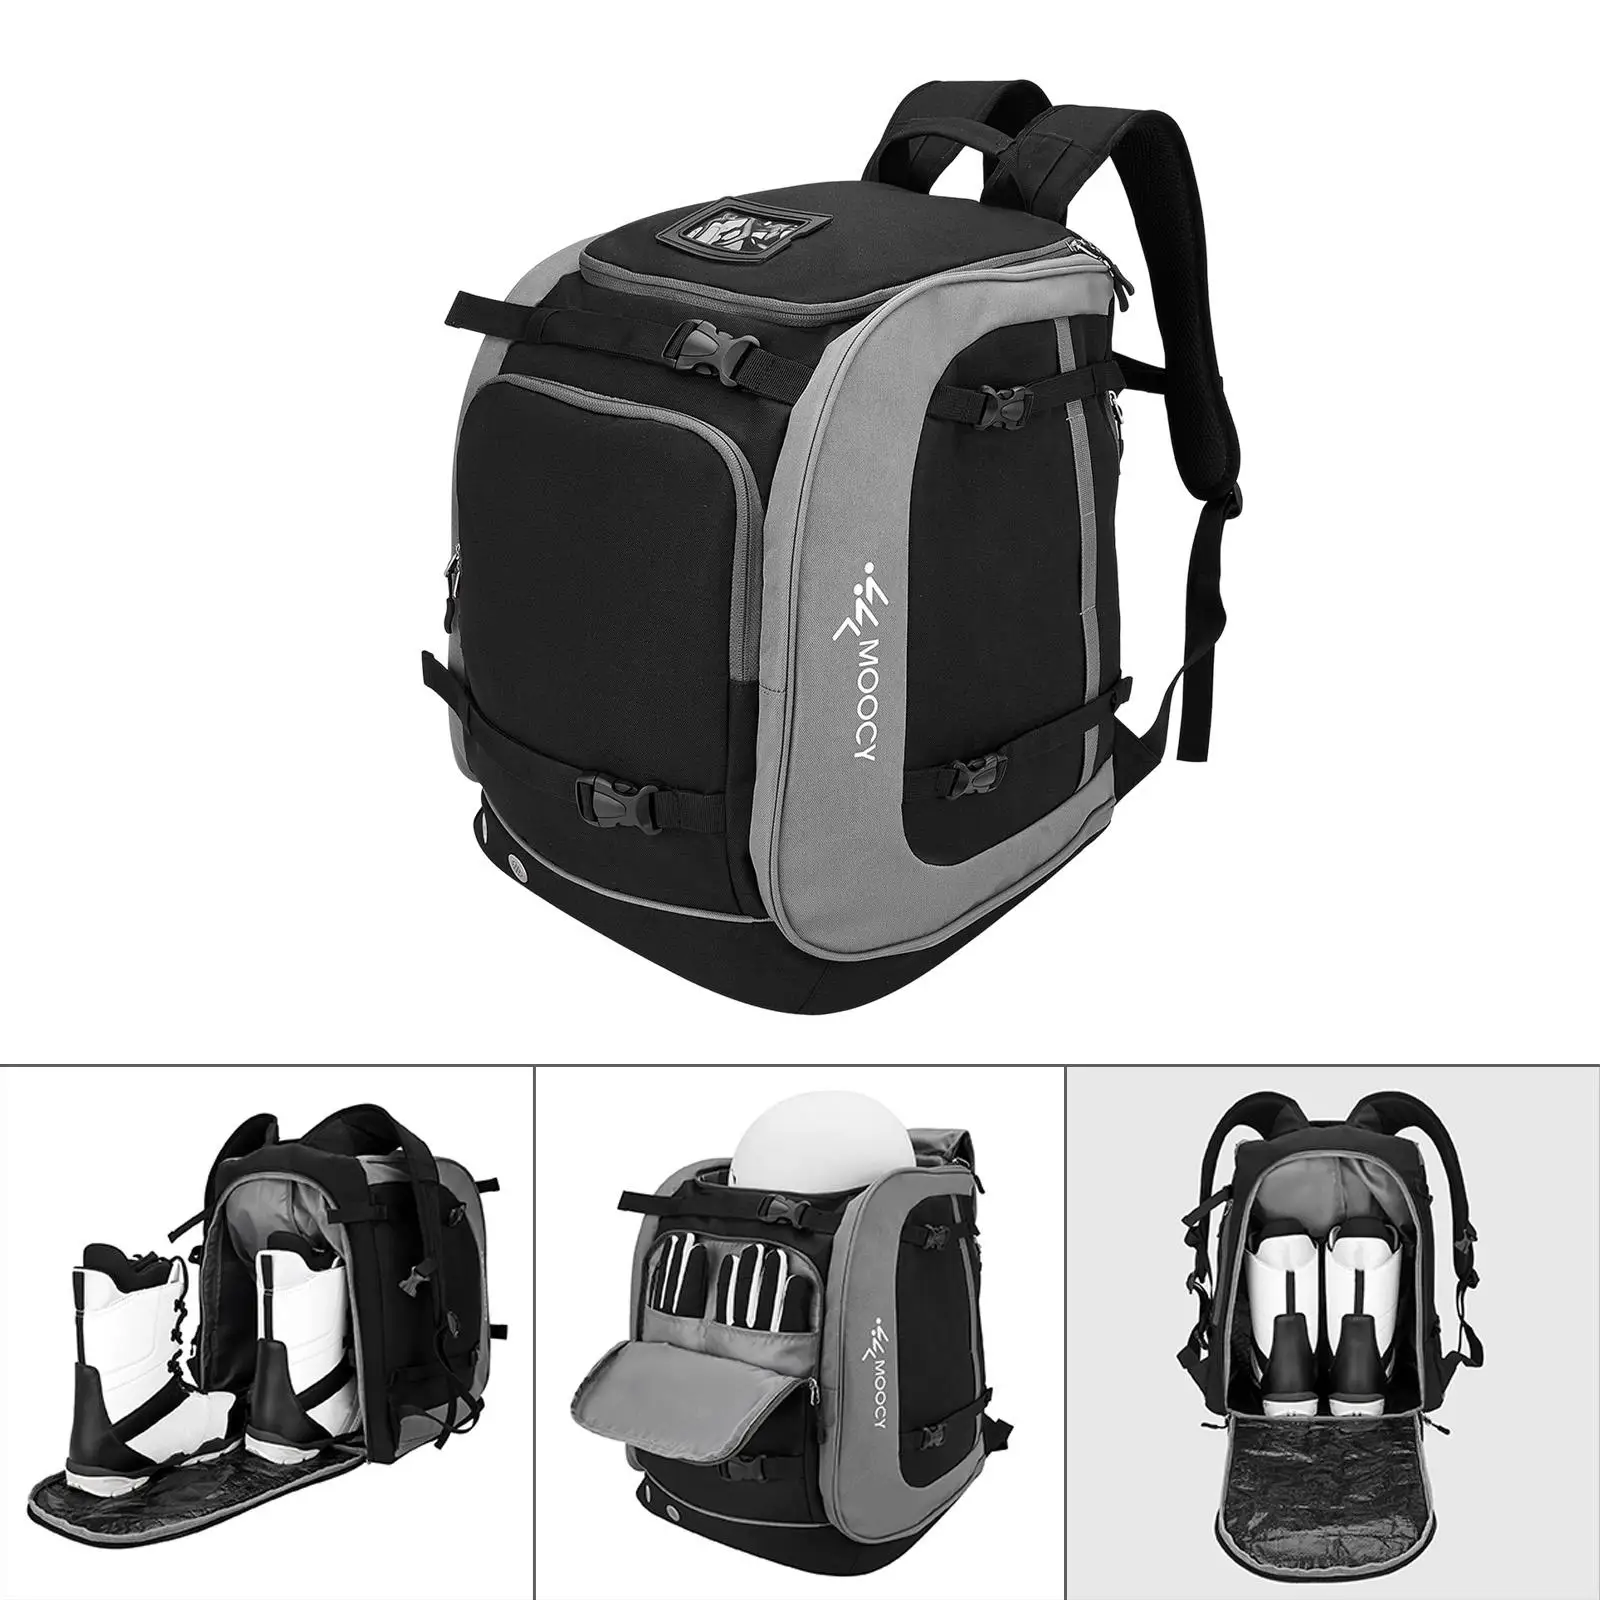 Portable 65L Ski Backpack Large Capacity Carrying Storage Bag Oxford Cloth for Air Travel Travel Gloves Snowboard Accessories